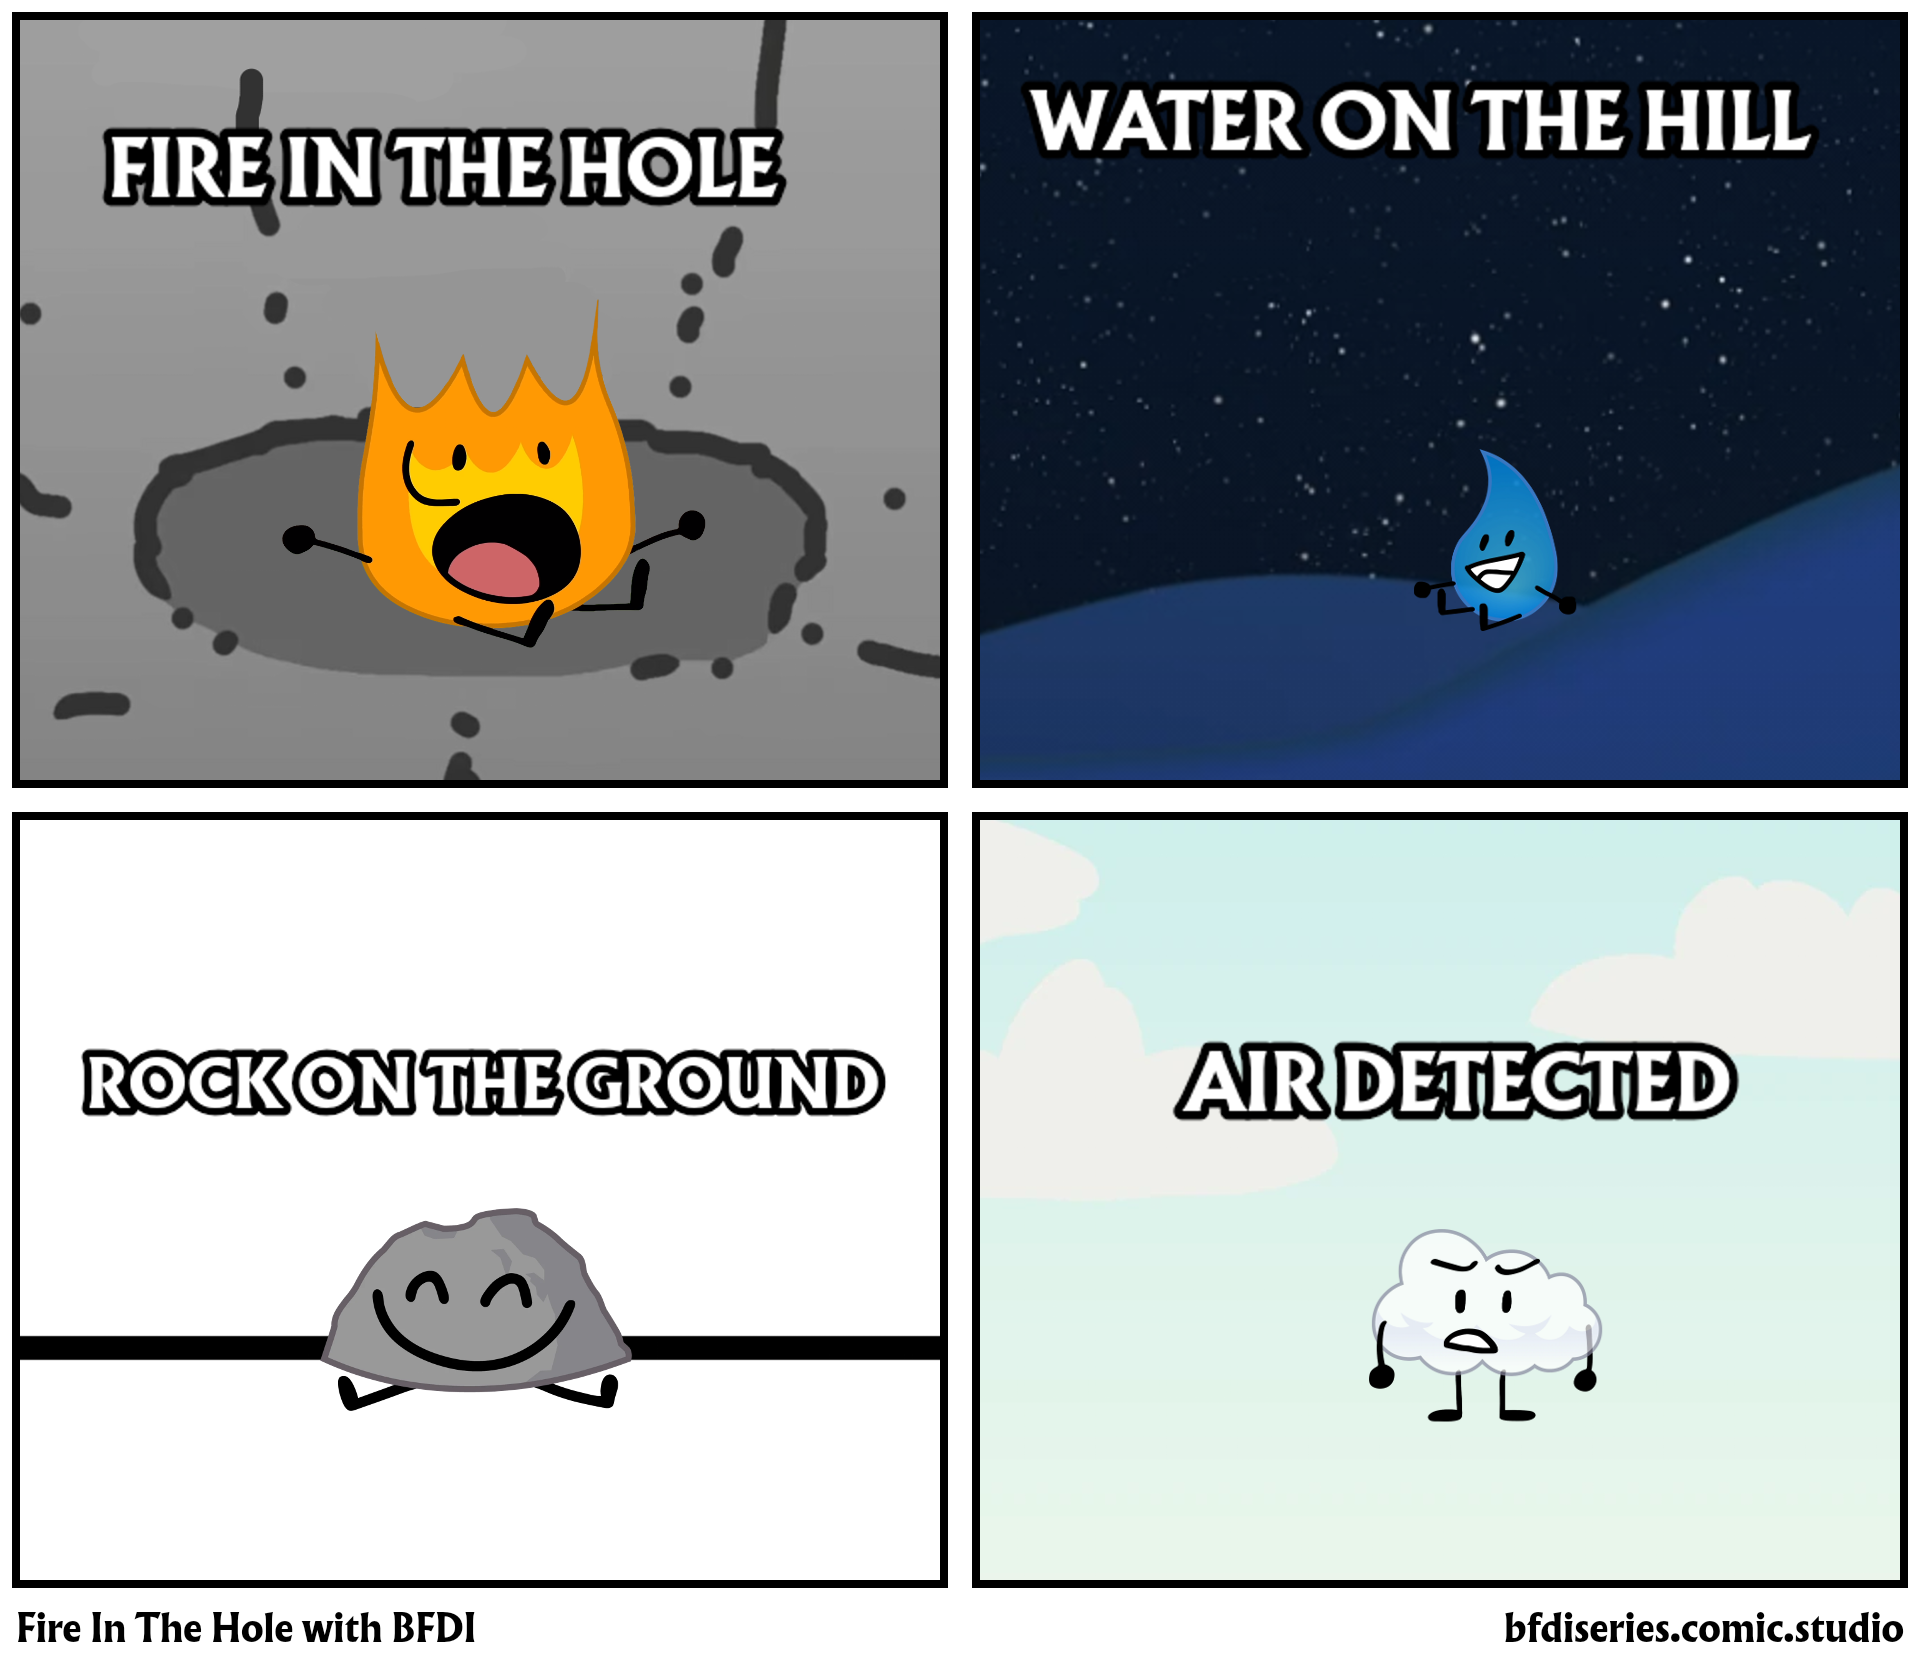 Fire In The Hole with BFDI